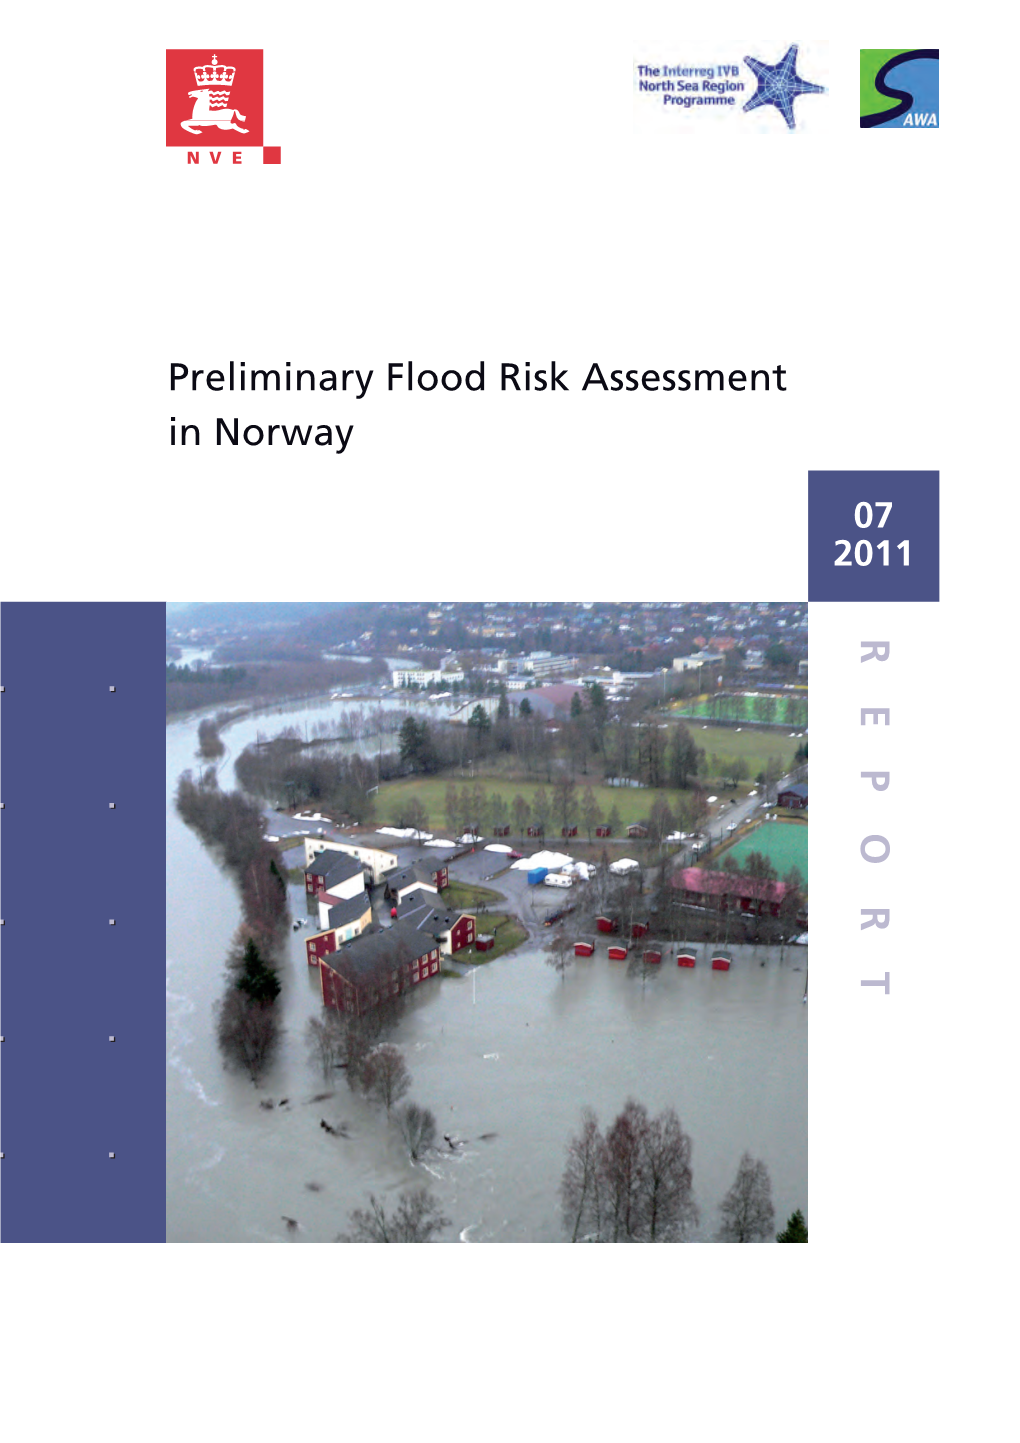 Preliminary Flood Risk Assessment in Norway